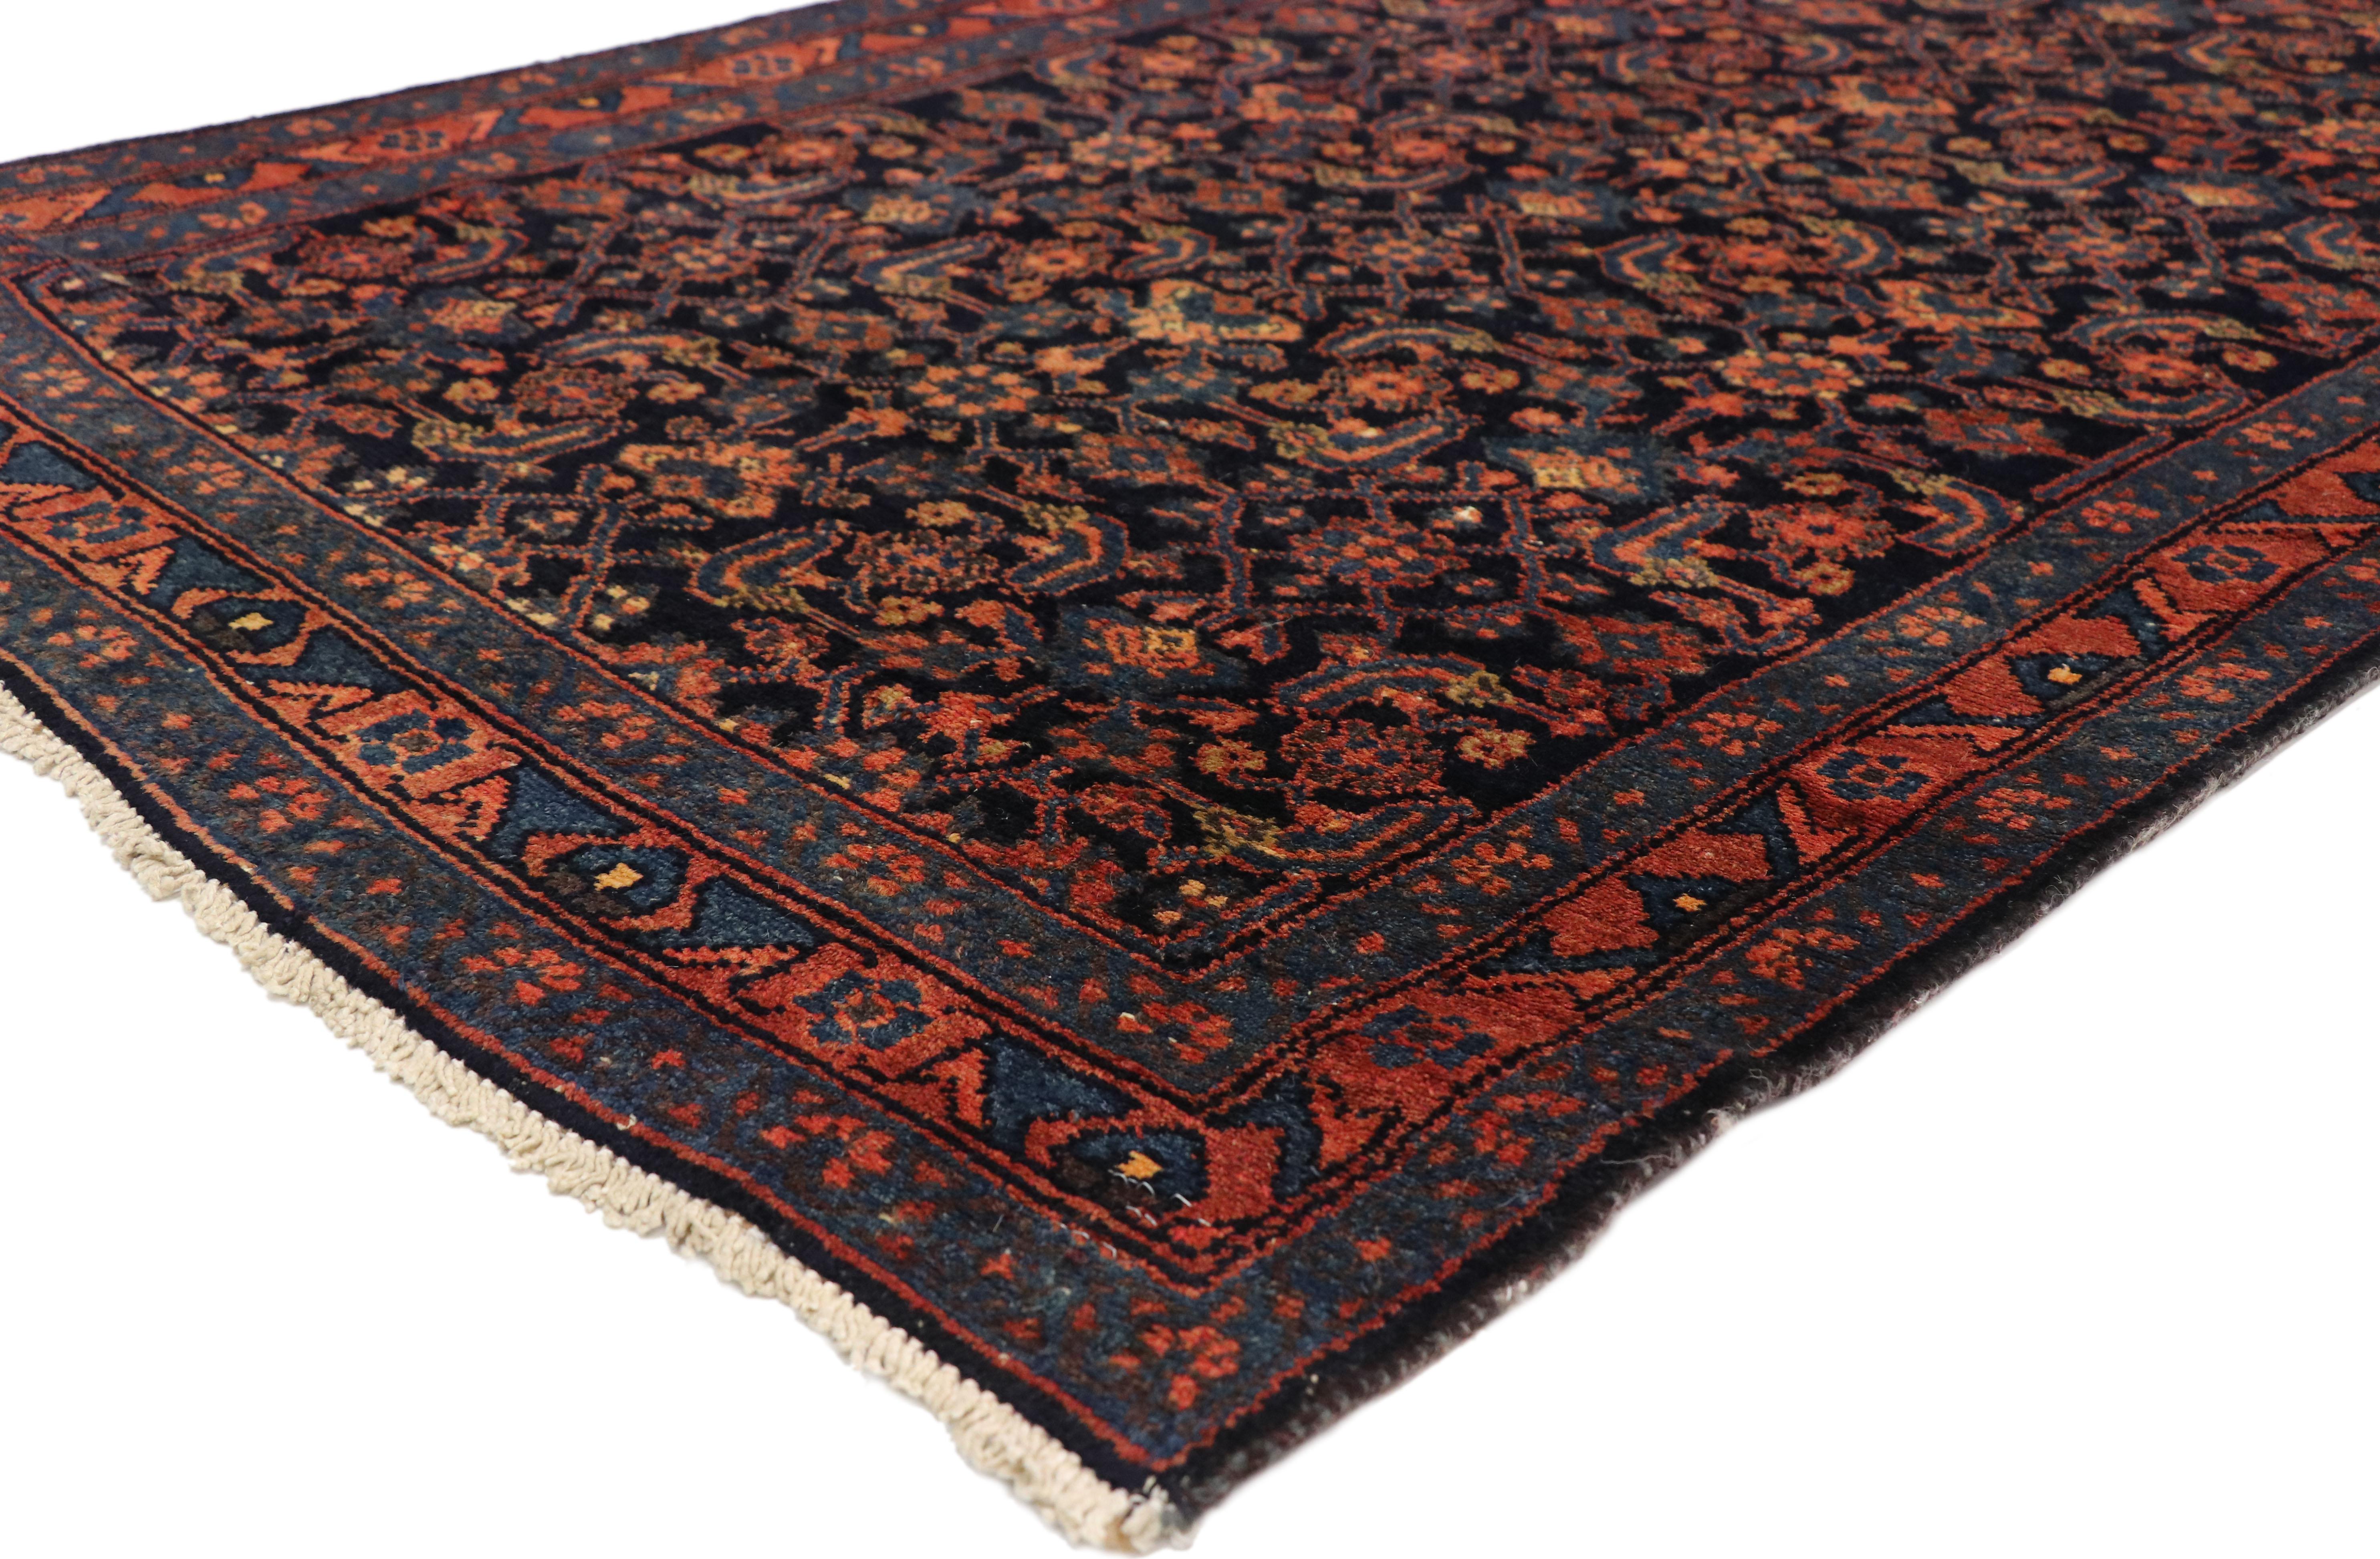 75365, antique Persian Malayer runner with modern Victorian style. This hand knotted wool antique Persian Malayer runner features an all-over Herati pattern spread across an abrashed field. The classic Herati pattern, also known as the Mahi or Fish